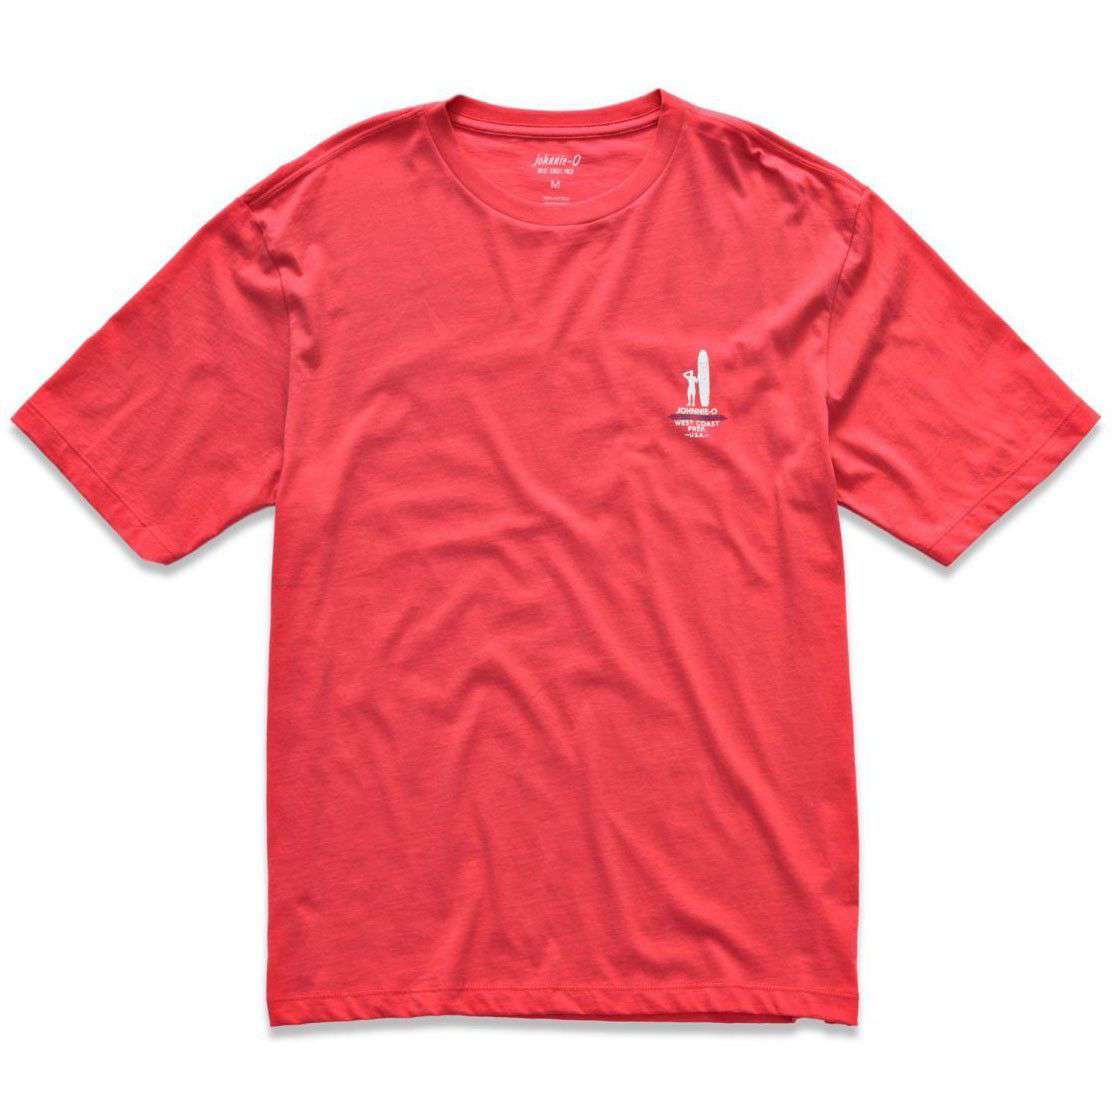 The Match Graphic Tee in Samba Red by Johnnie-O - Country Club Prep